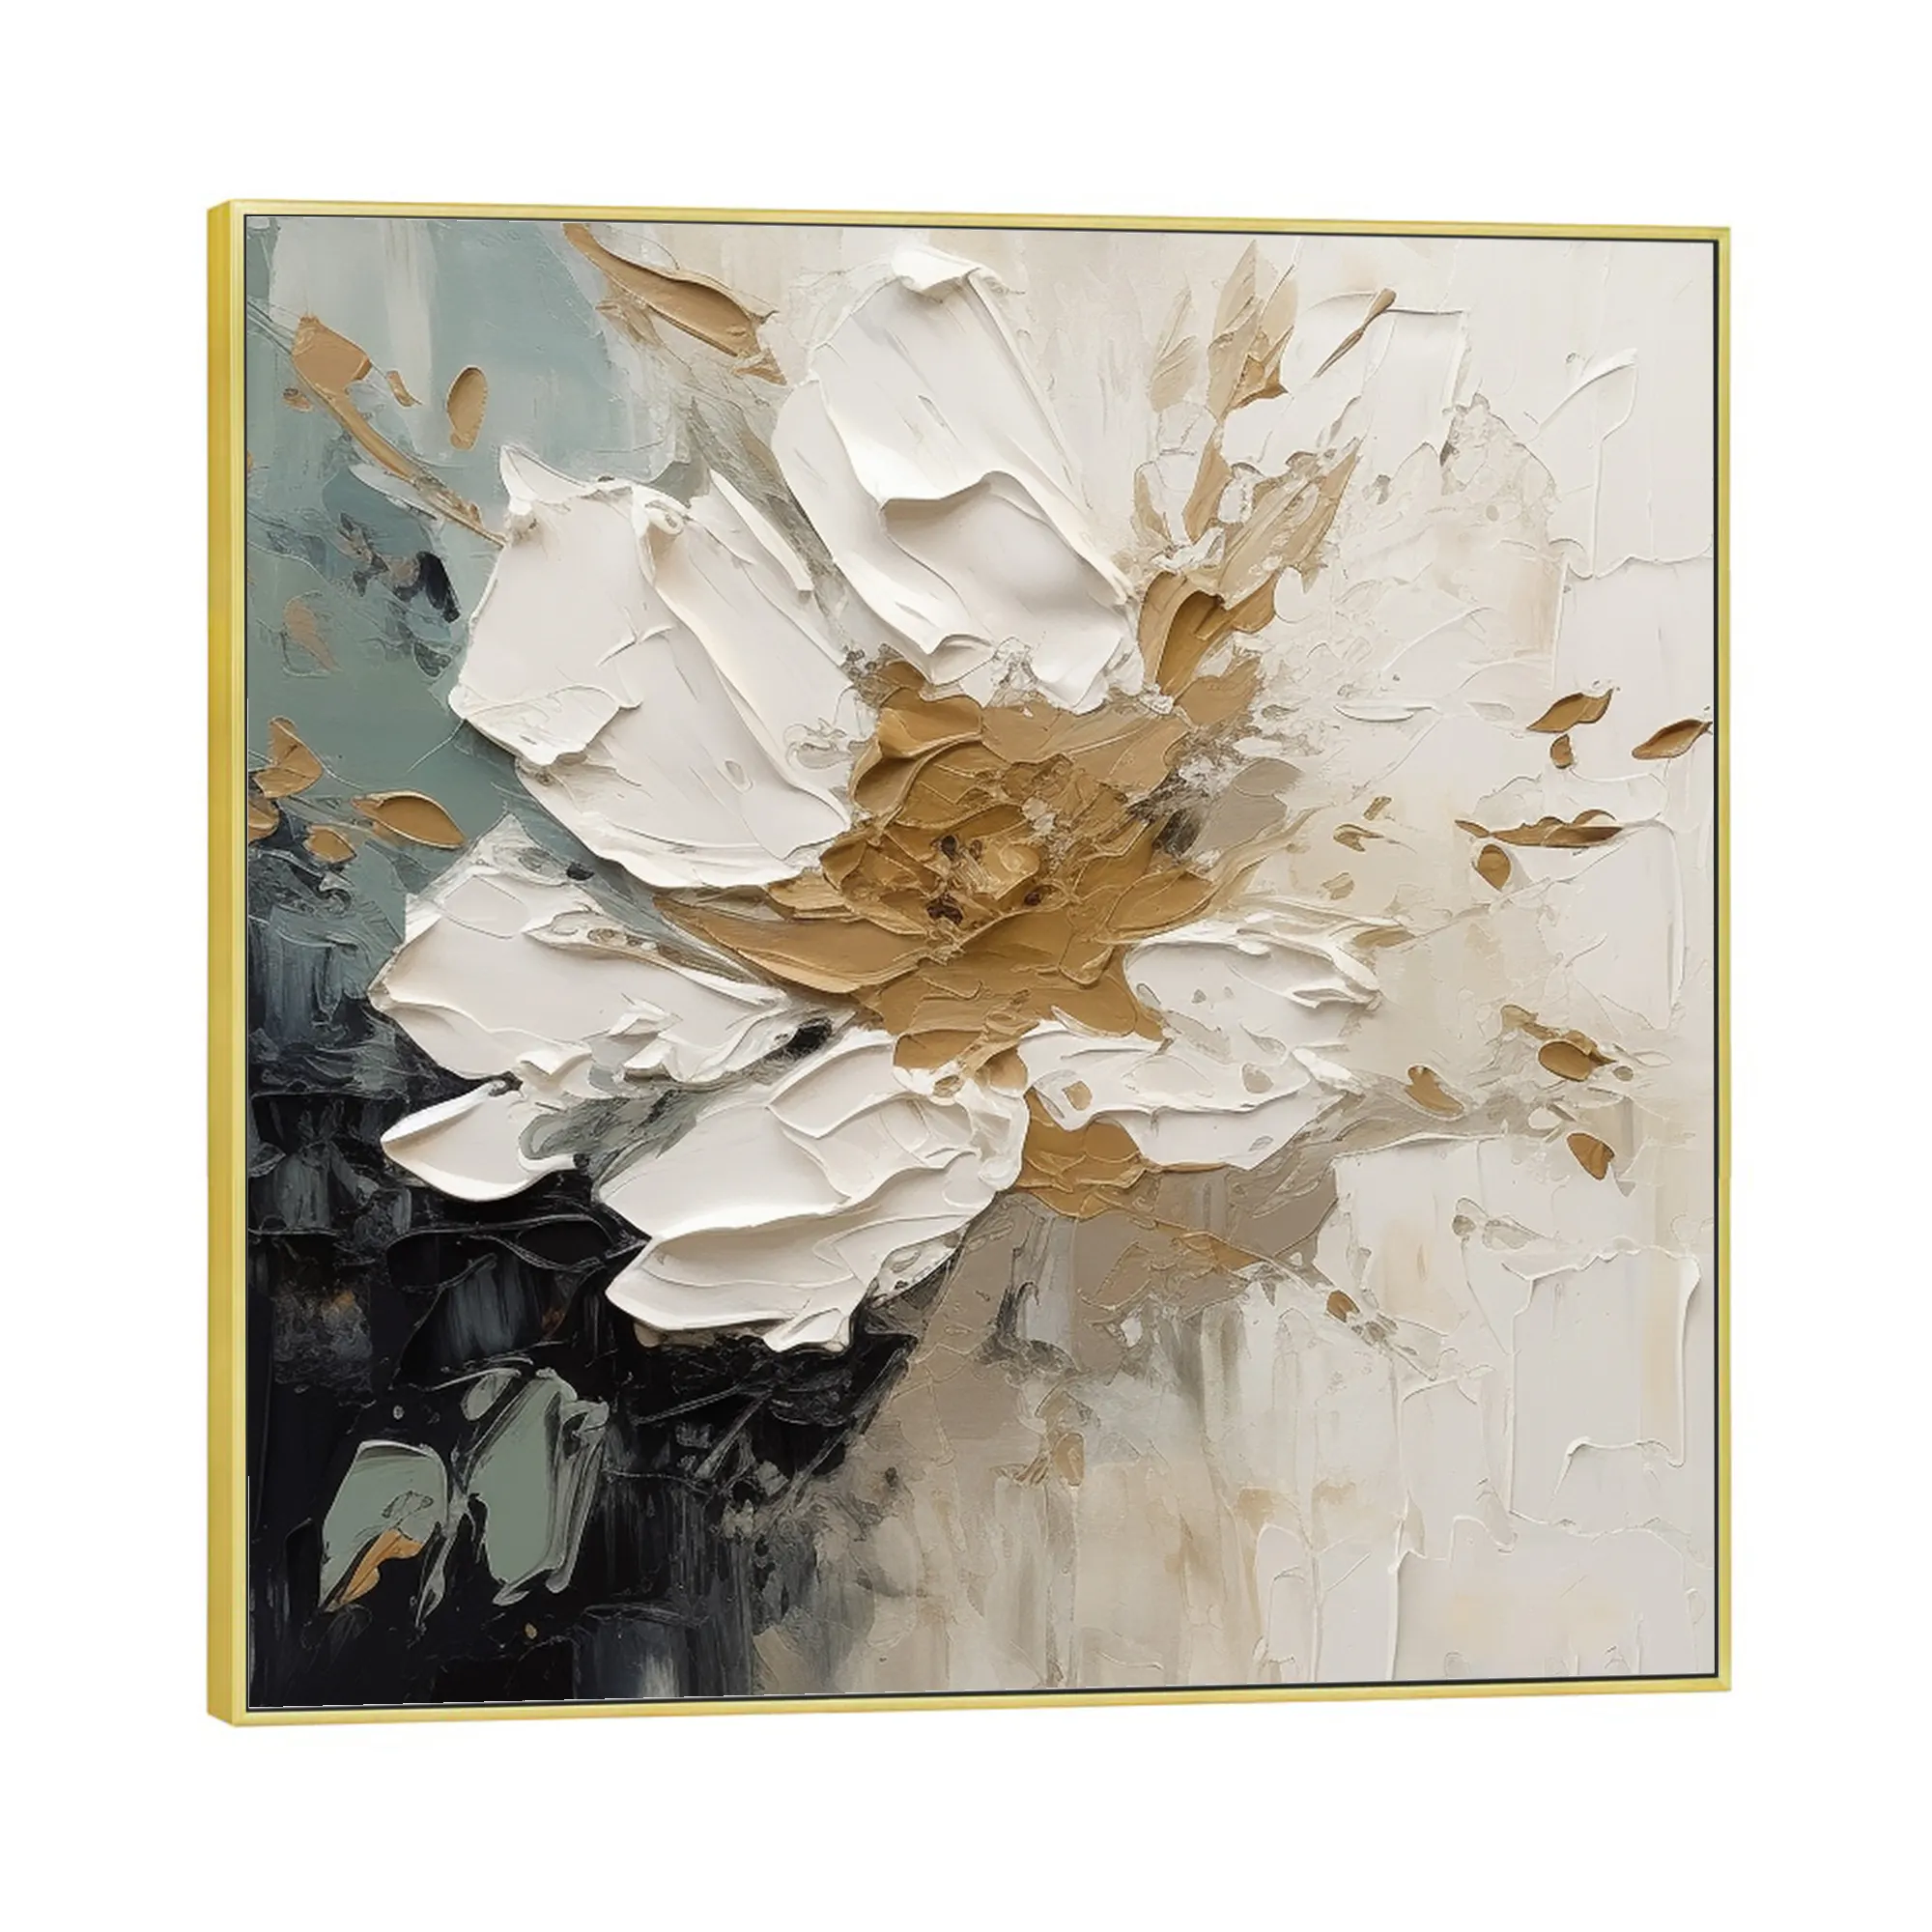 White Flower Oil Painting Abstract White Flower Wall Art Blooming White Floral Oil Painting Modern Living Room Wall Decor